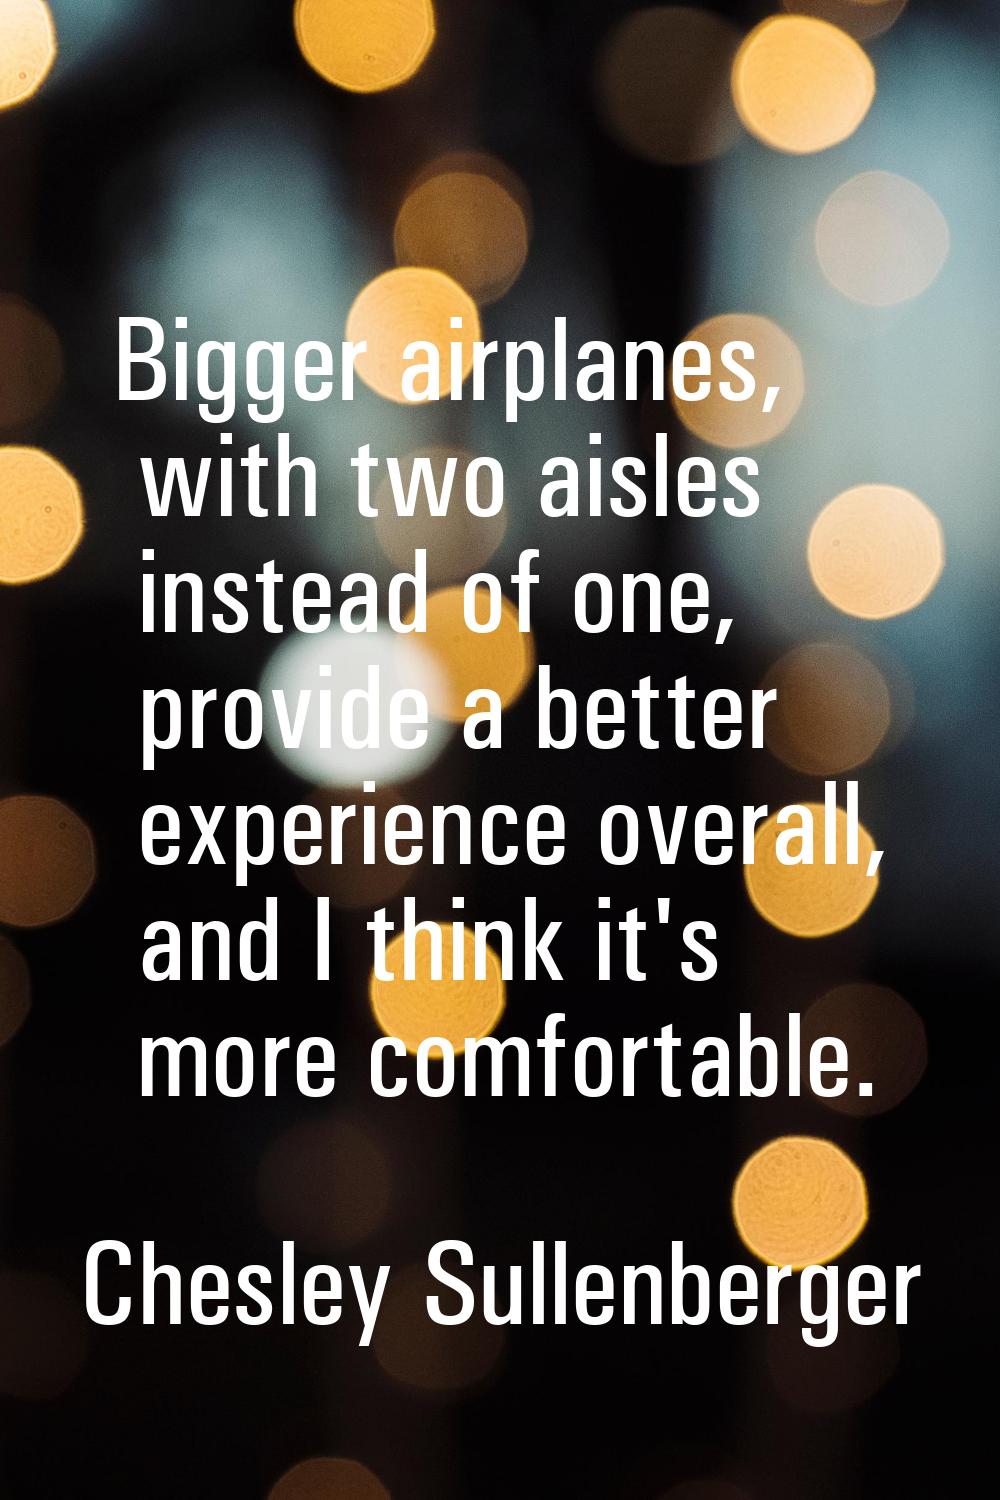 Bigger airplanes, with two aisles instead of one, provide a better experience overall, and I think 